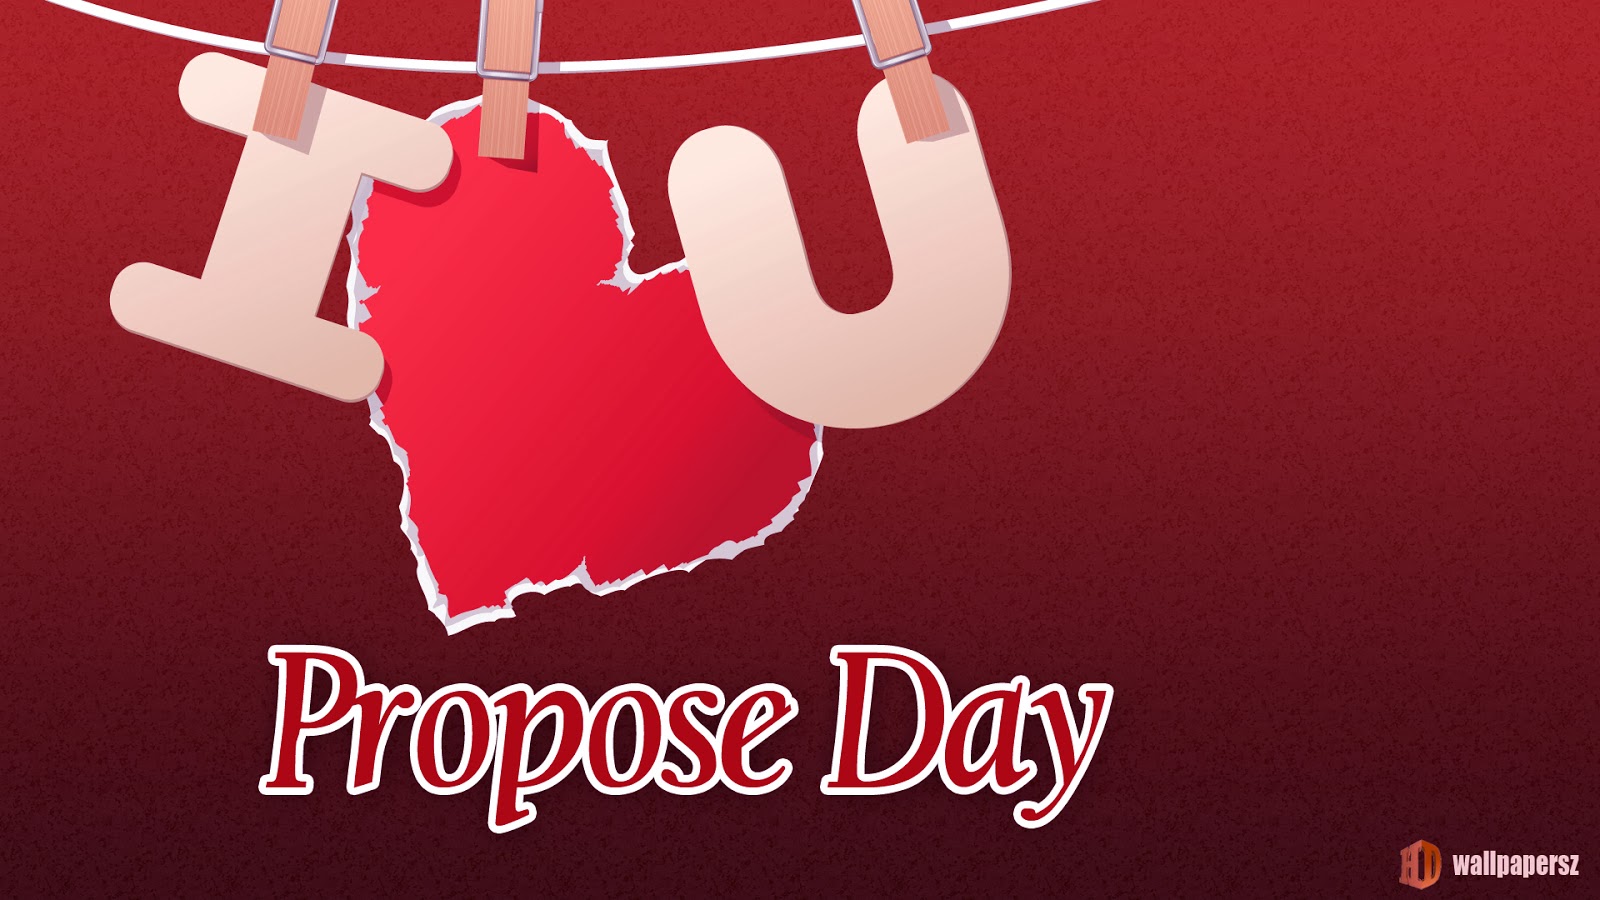 I Love You Propose Day Wallpaper - Propose Day Pic Download - HD Wallpaper 